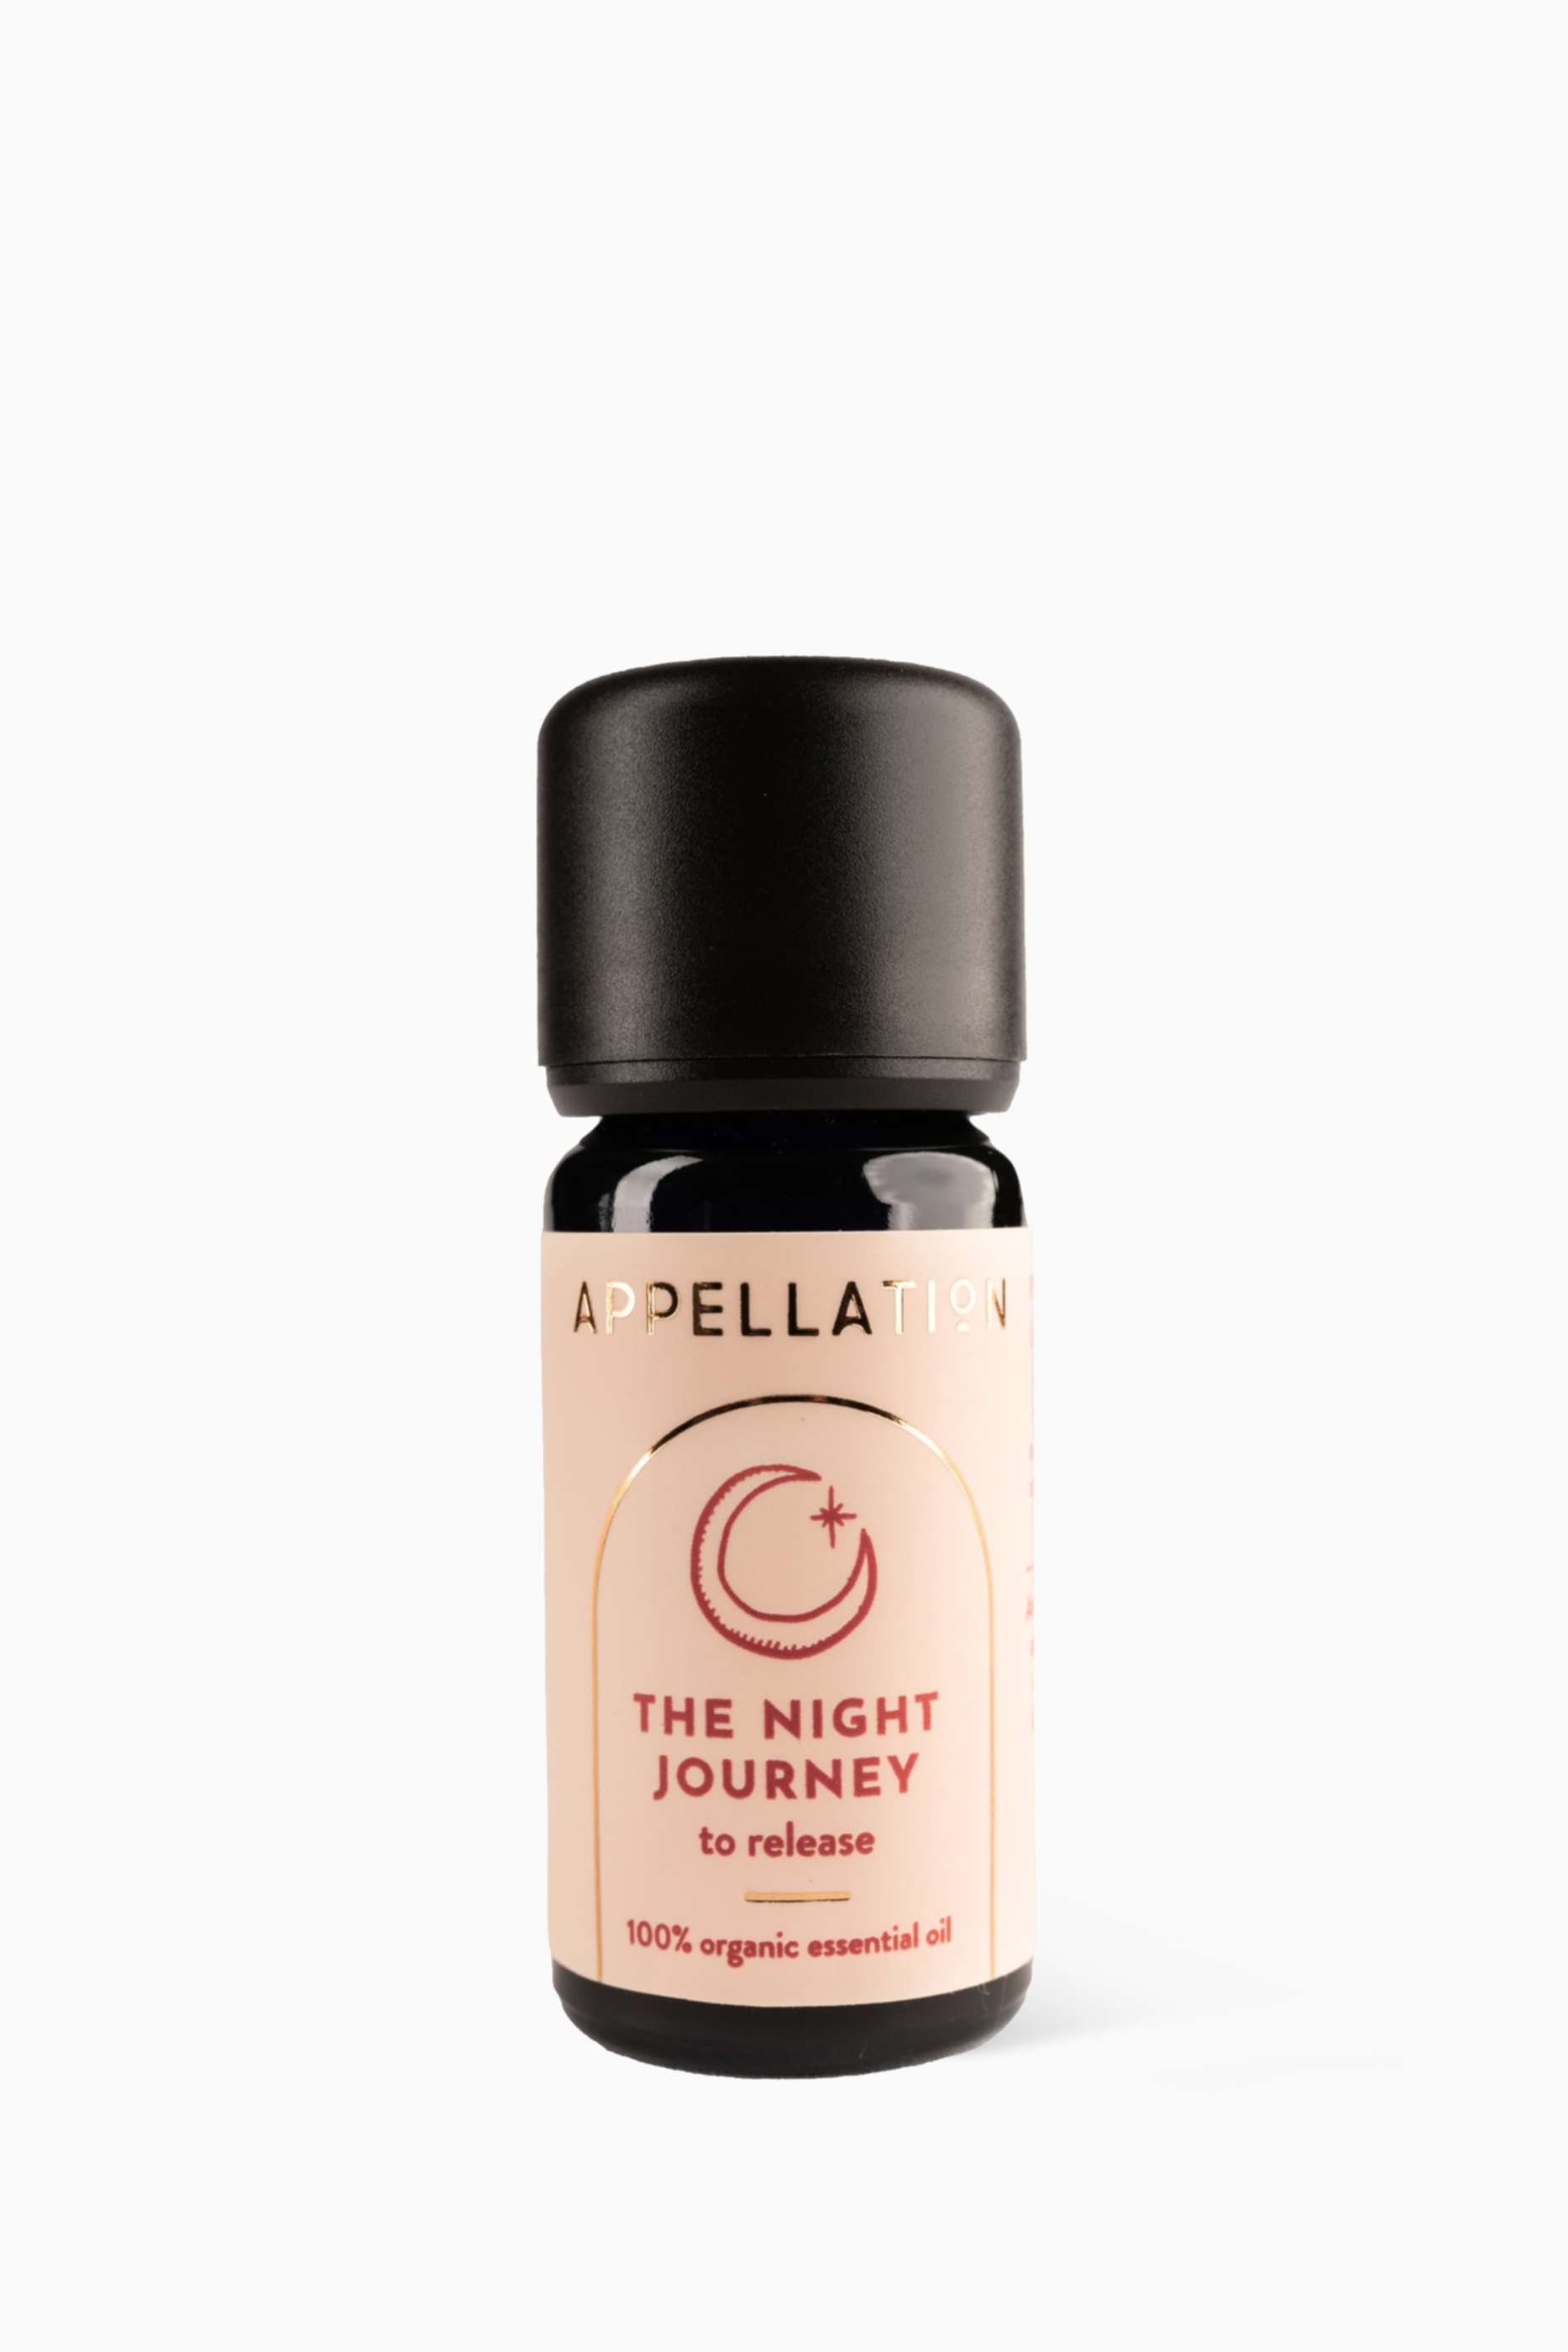 shop-appellation-the-night-journey-aromatherapy-essential-oil-blend-10ml-for-unisex